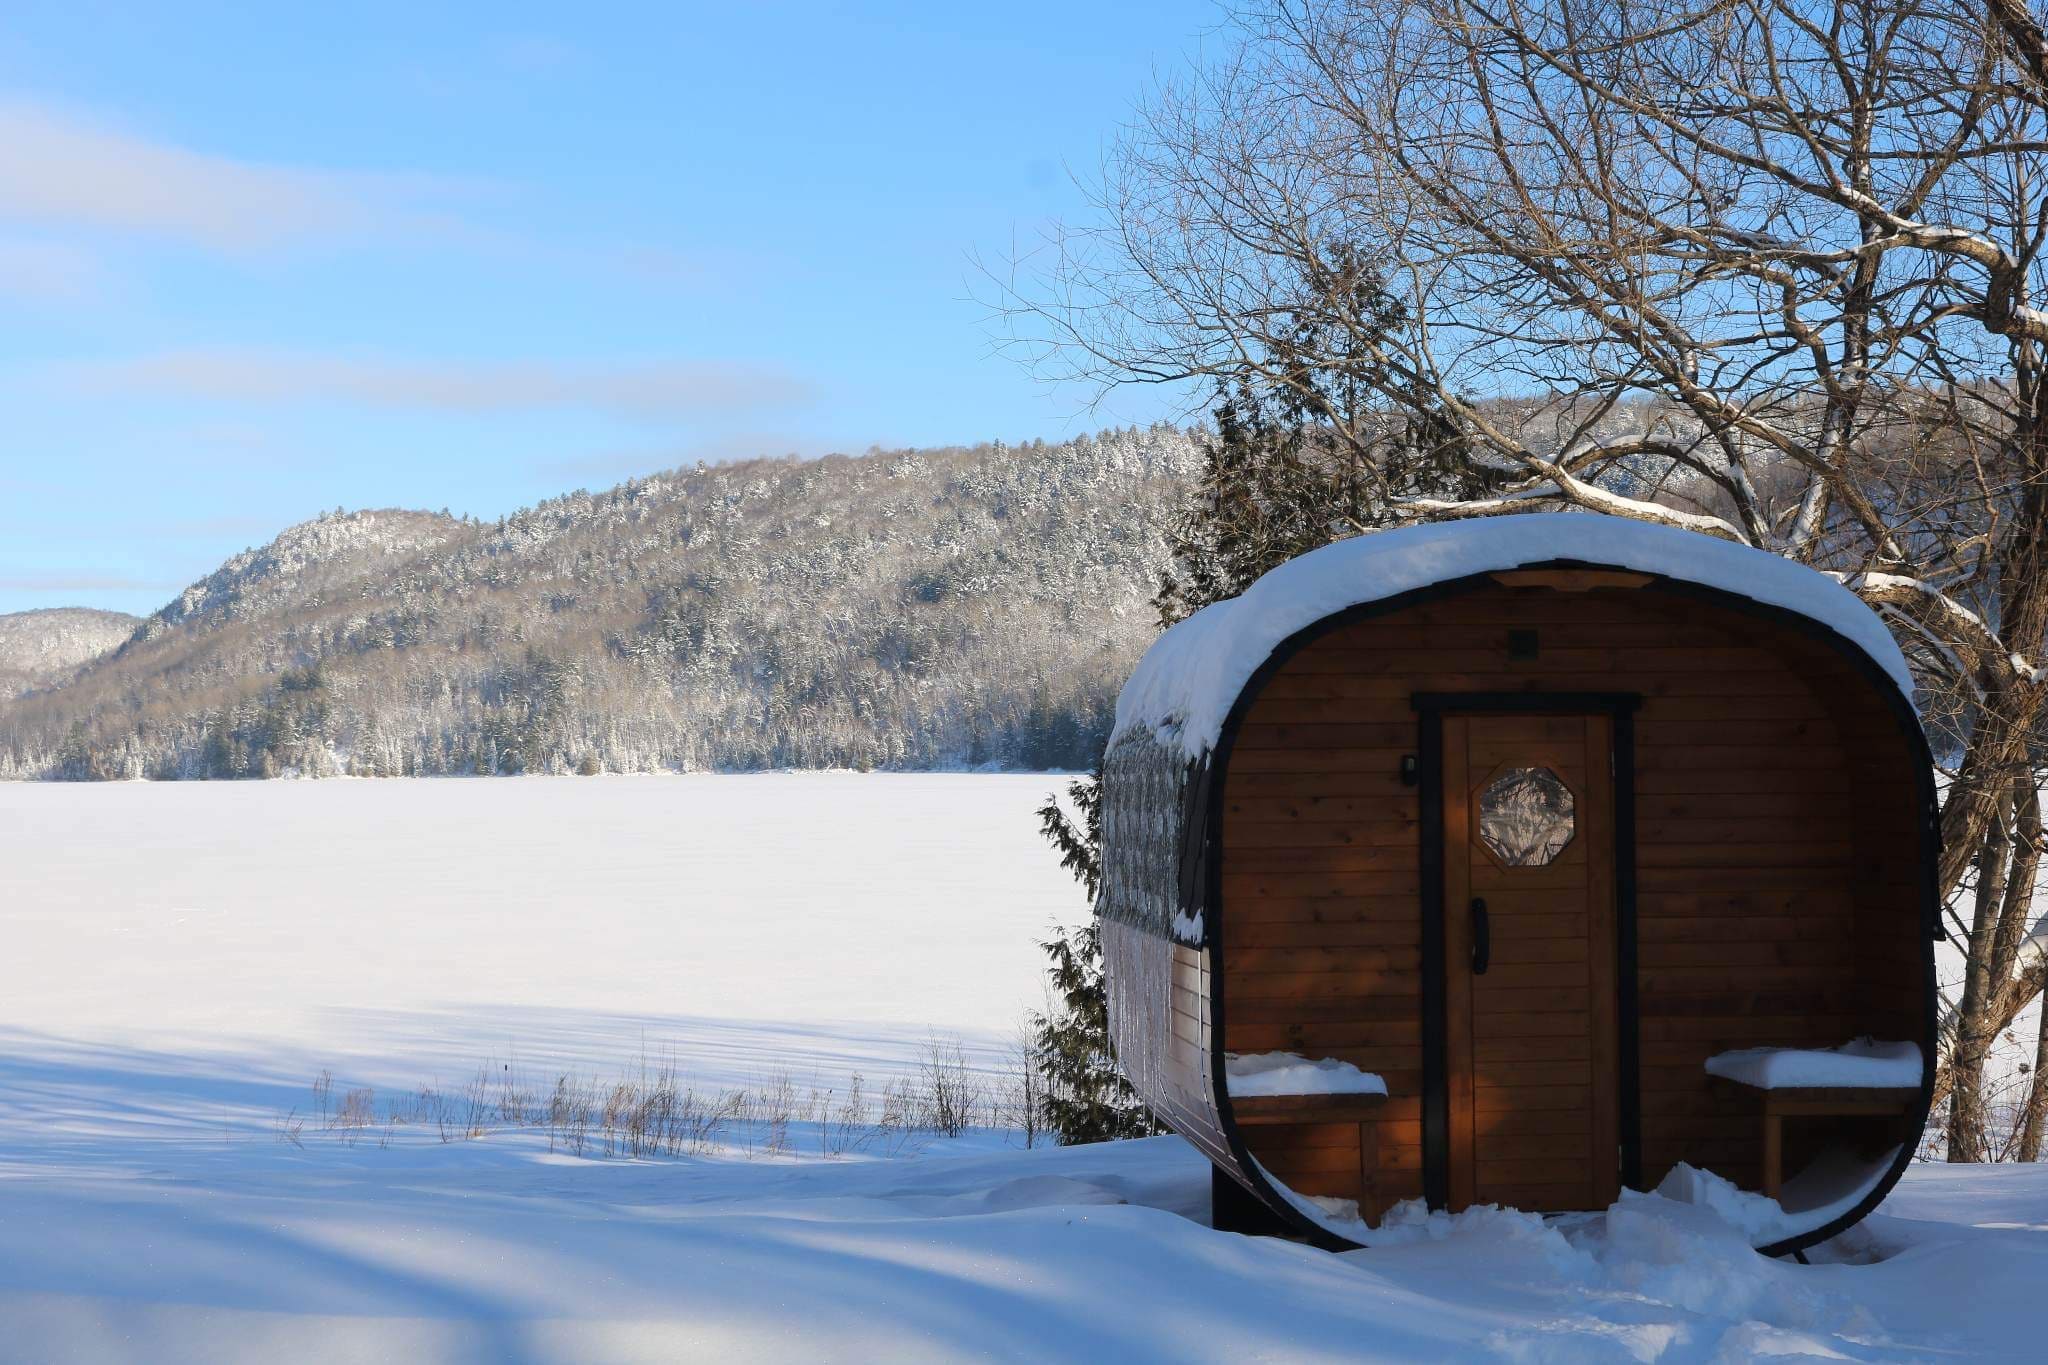 A sauna cabin in the snowy landscape with an iced lake behind in Quebec, Canada.